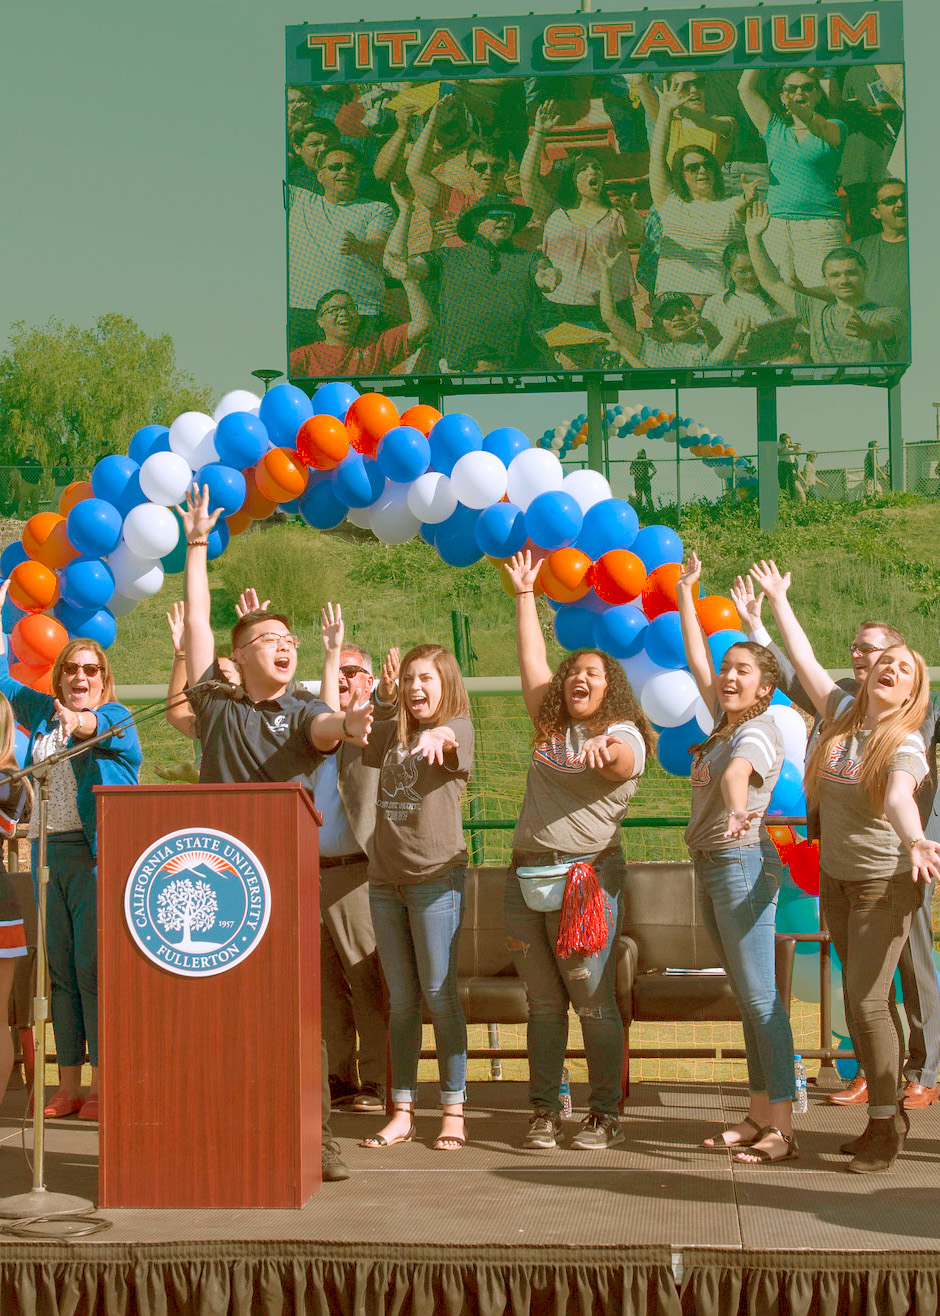 Students celebrating a CSUF event